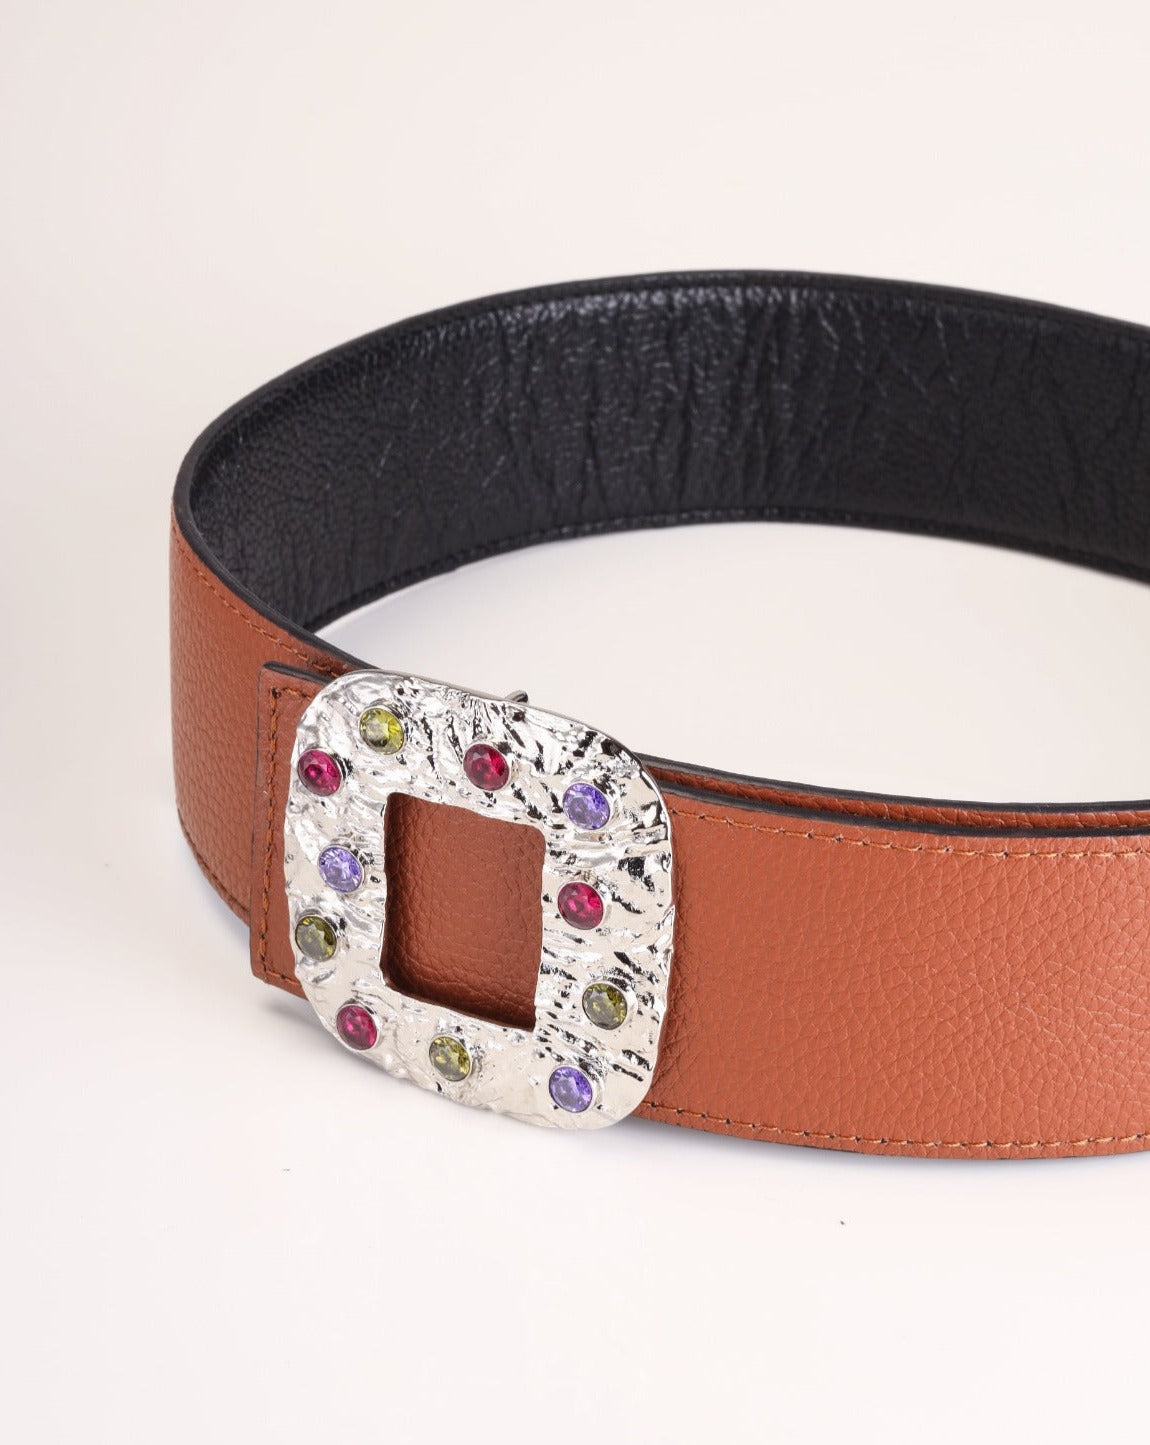 Reversible Wide Belt with Silver Square Buckle